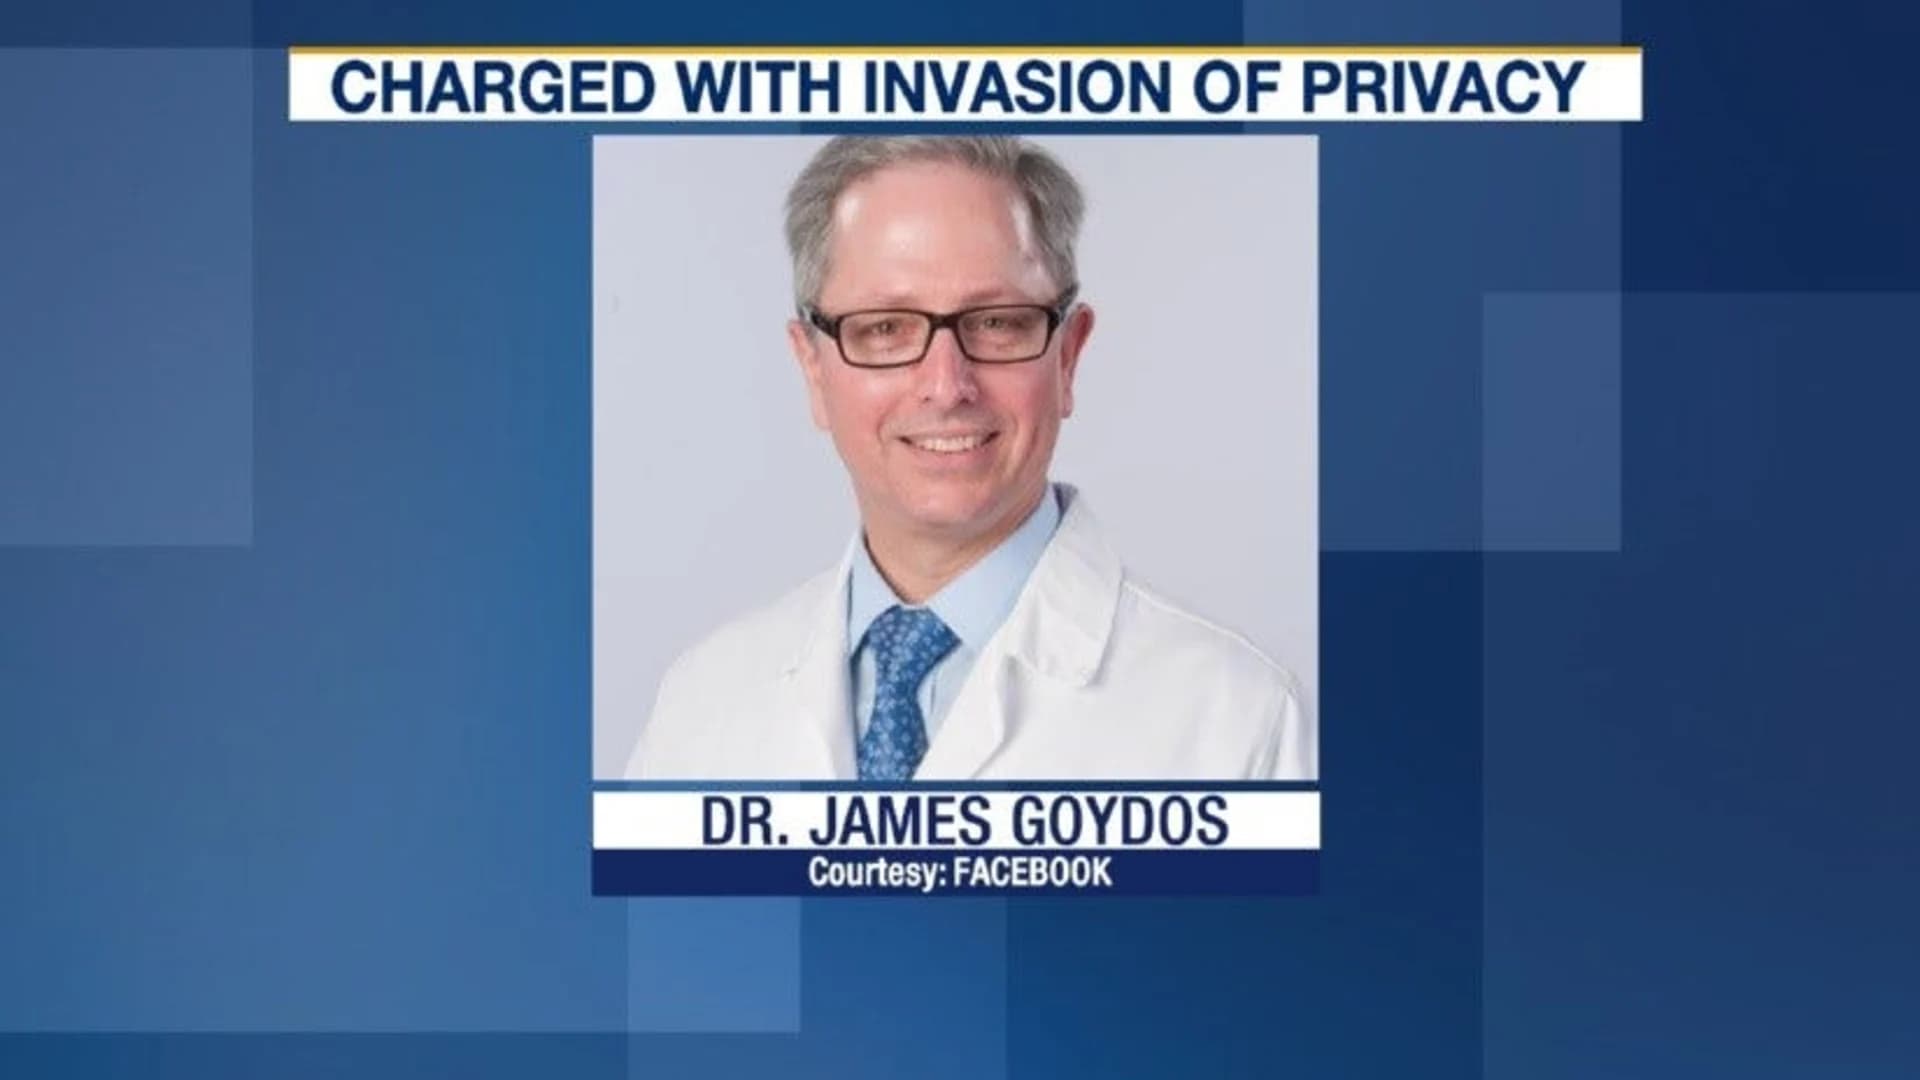 Former Rutgers doctor accused of taking pictures of over 2 dozen women in bathroom